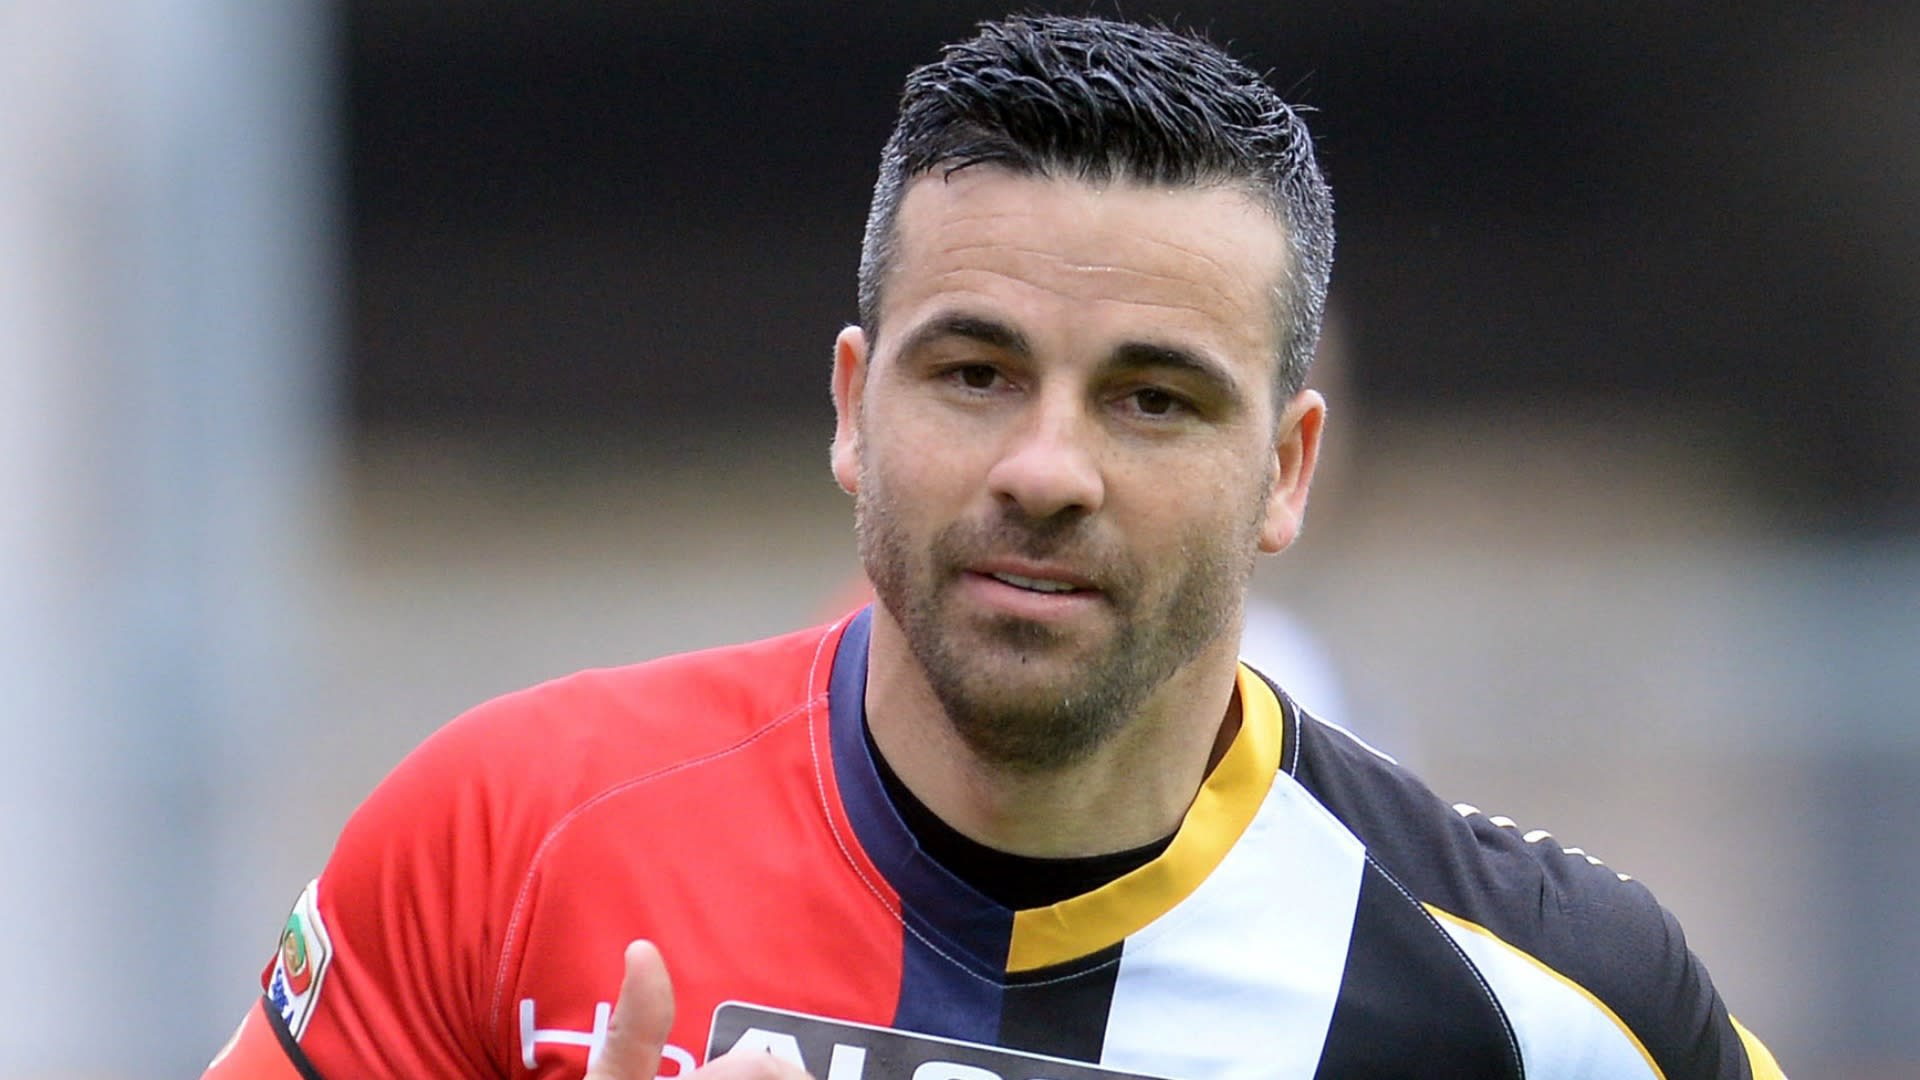 Natale Di Natale.Liverpool Wanted Me At All Costs Claims Di Natale But Prolific Udinese Legend Snubbed Their Advances